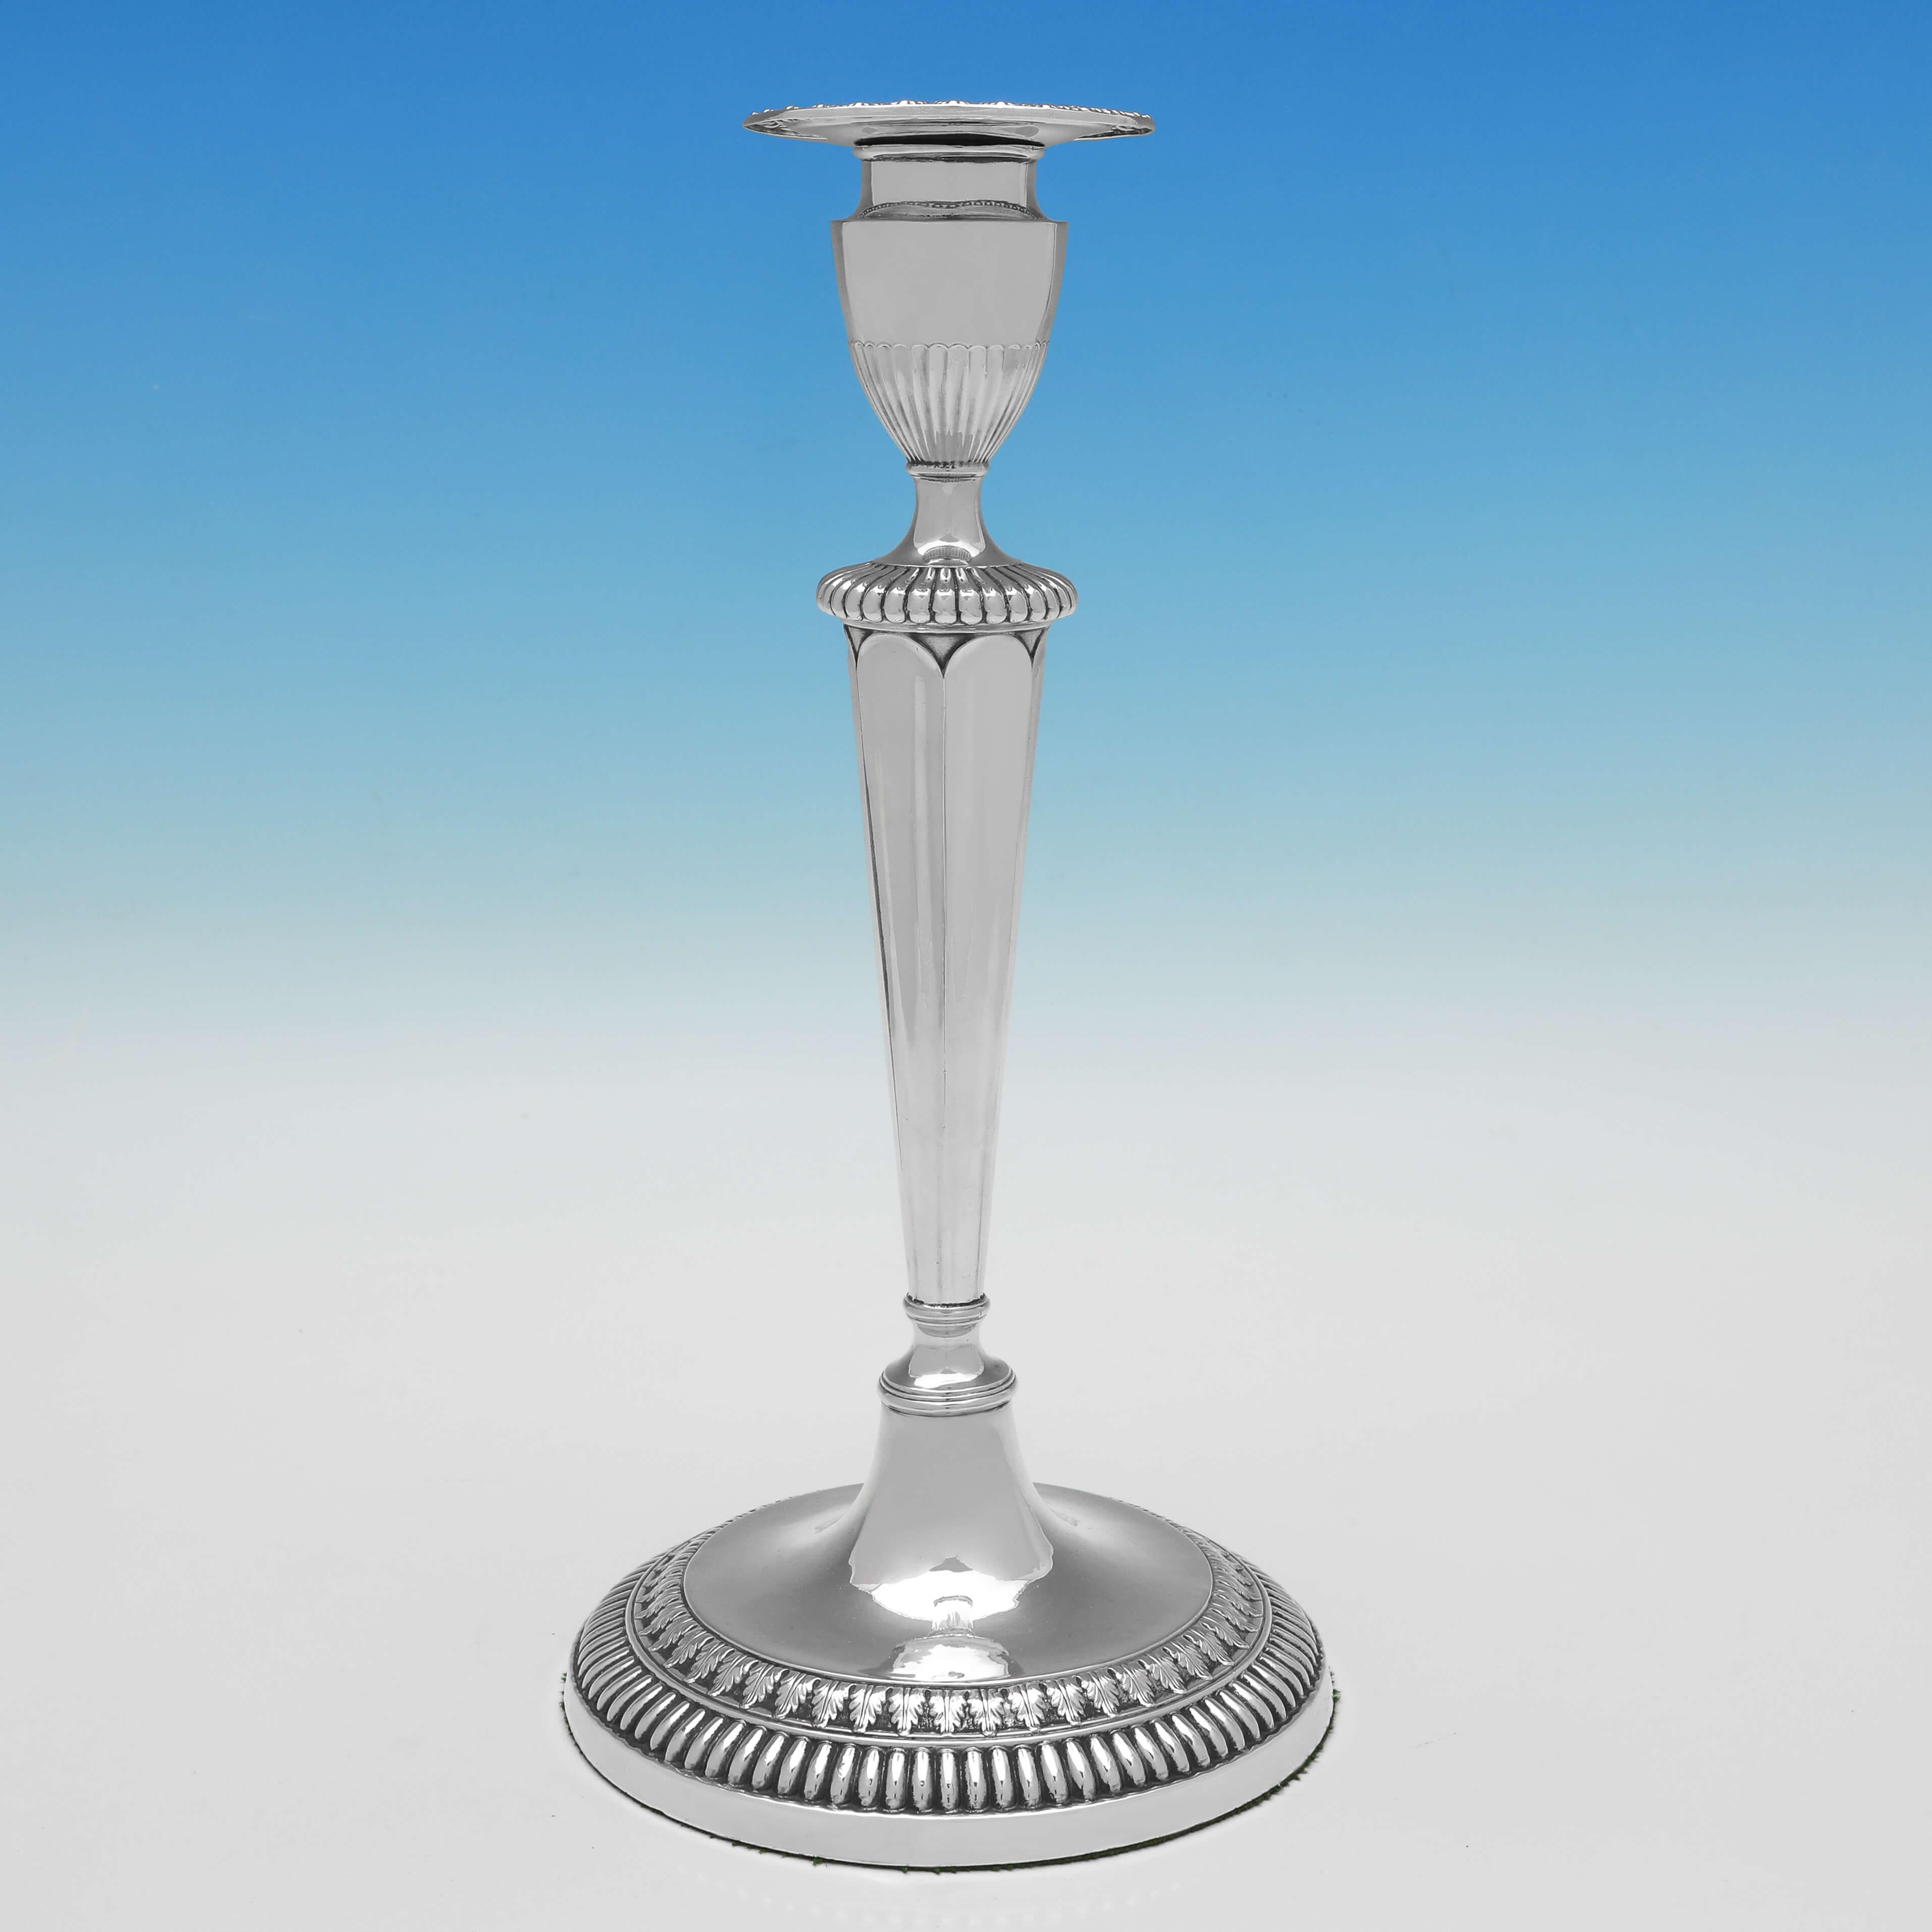 Made circa 1790, this charming set of 4 Antique Old Sheffield Plate Candlesticks, are in the Neoclassical taste, with bands of acanthus leaf and fluted decoration to the bases, fluting to the capitals, and removable nozzles with acanthus detailed